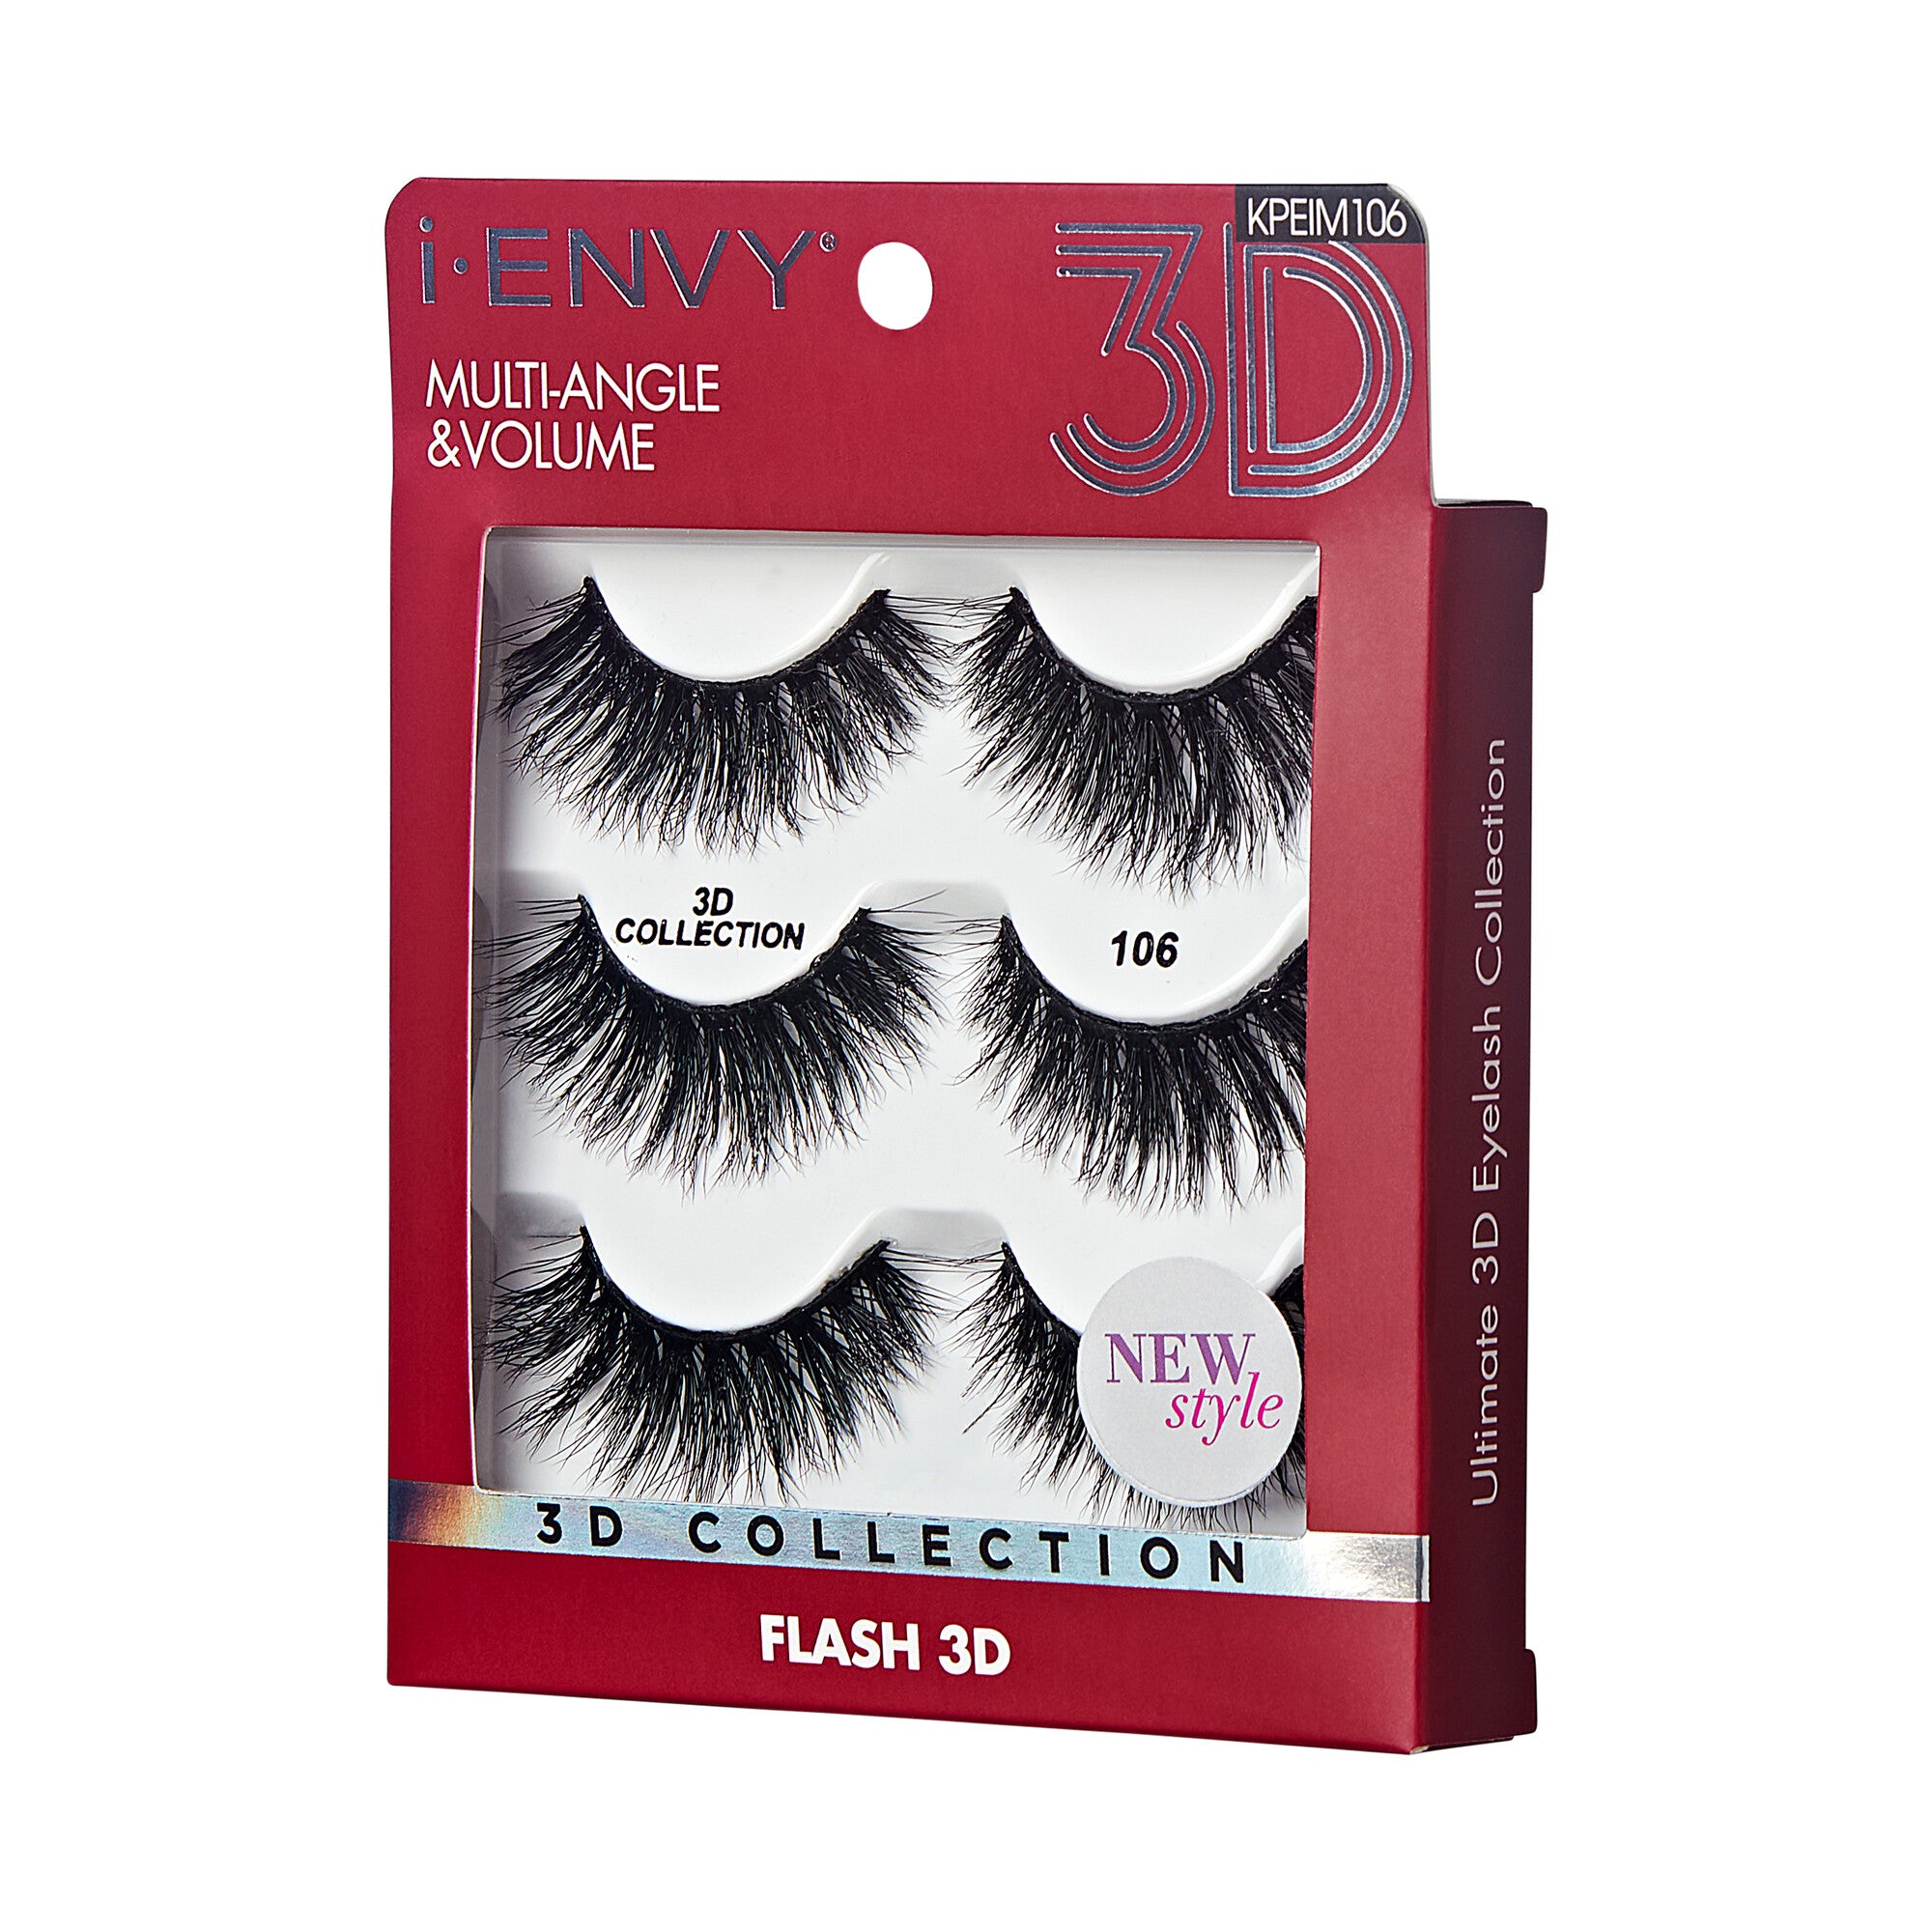 I.Envy By Kiss 3D Lashes Multi Pack Multiangle & Volume Collection-106 (KPEIM106)